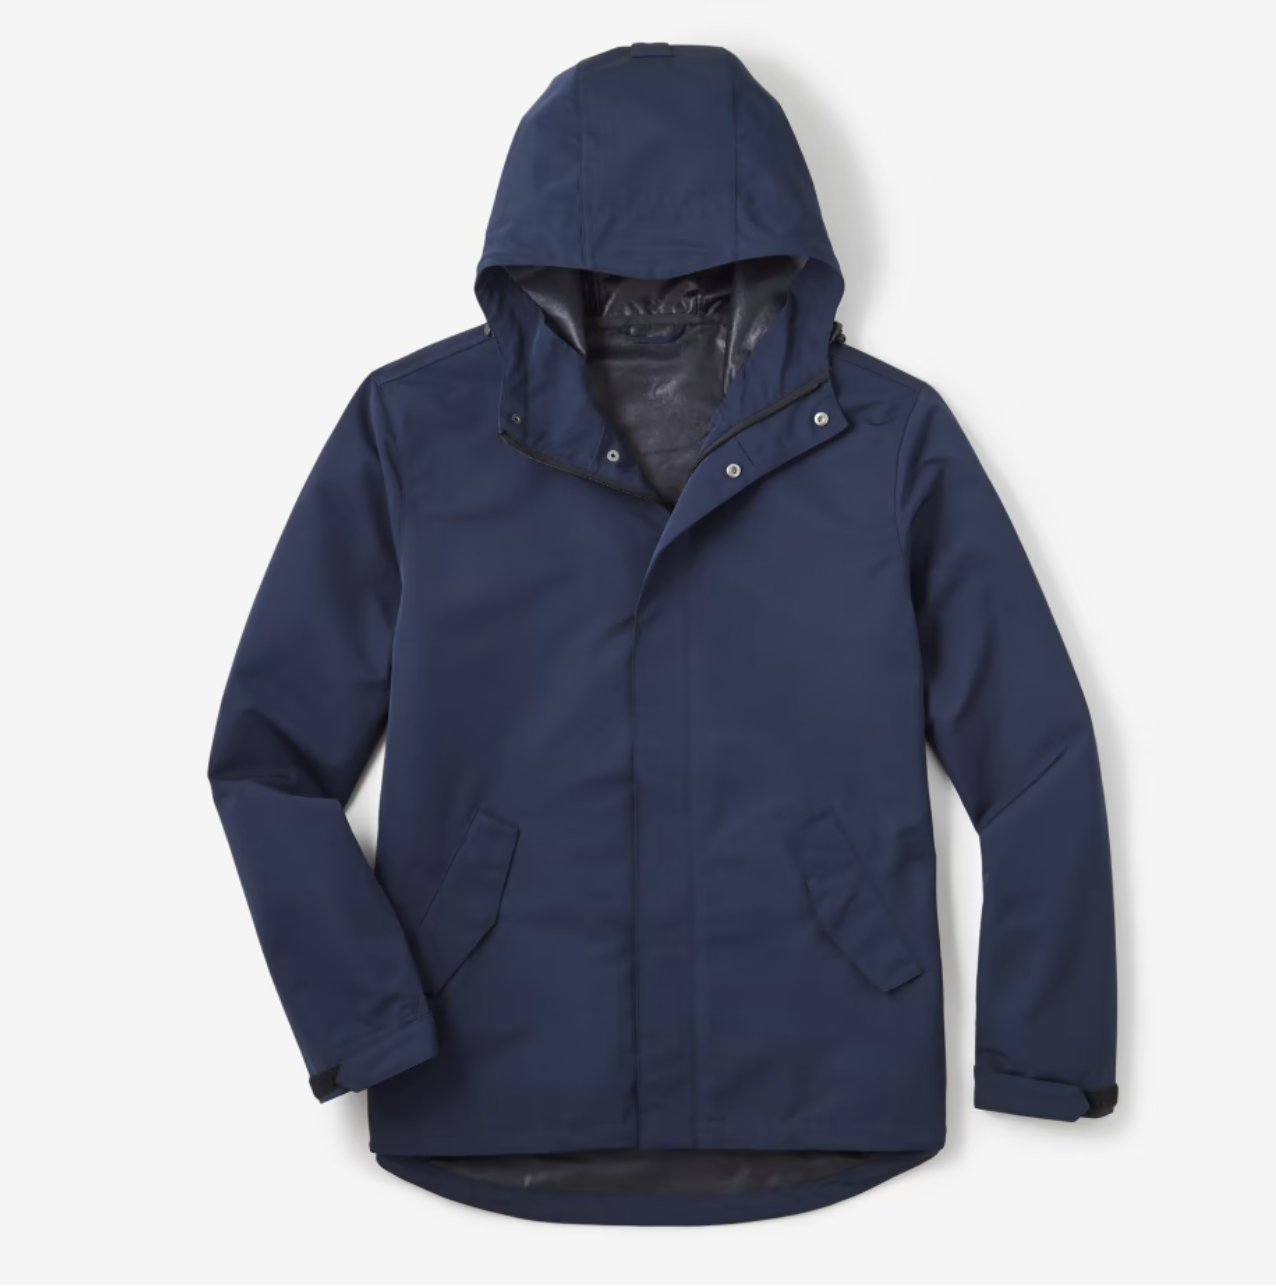 Rain jacket with hood and front pockets